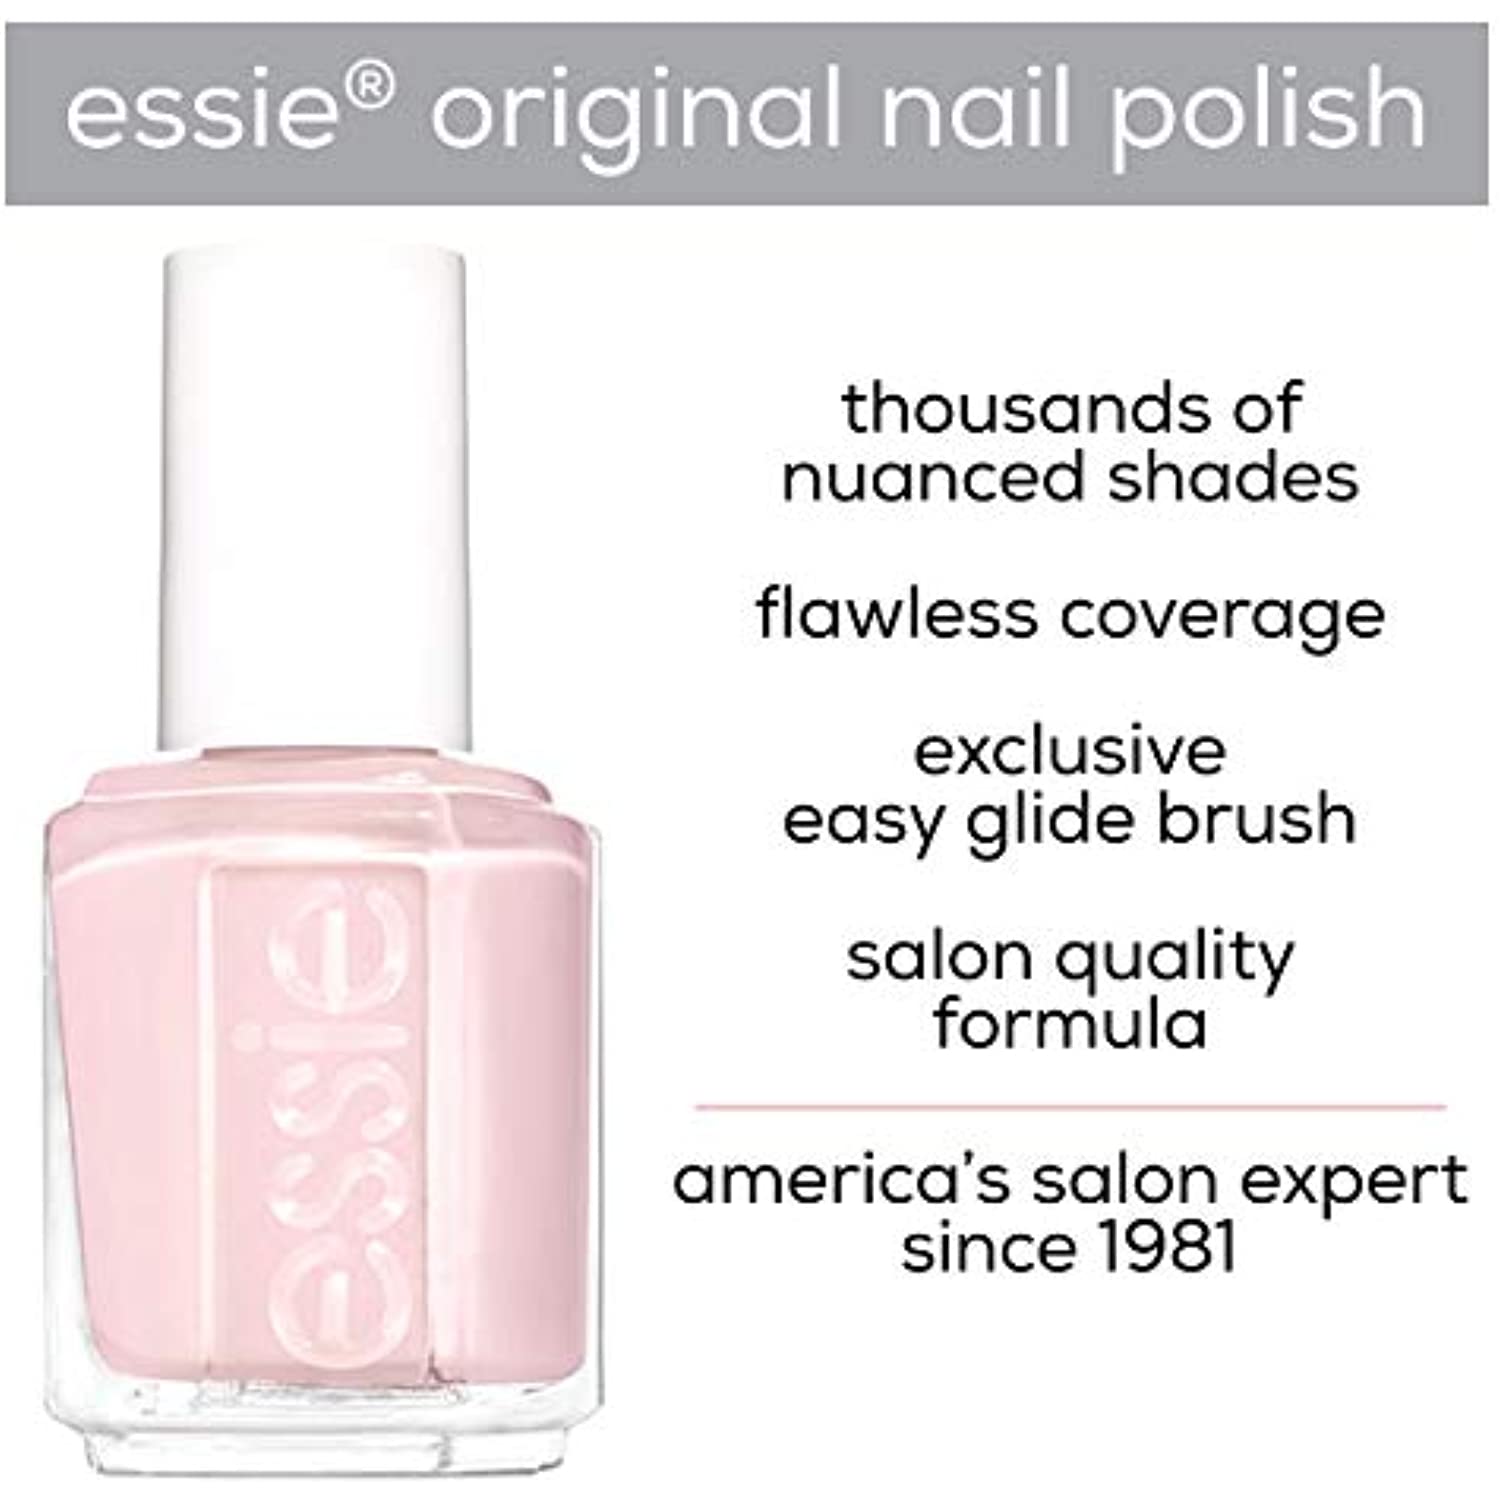 essie Nail Polish, Picked Perfect - image 4 of 7